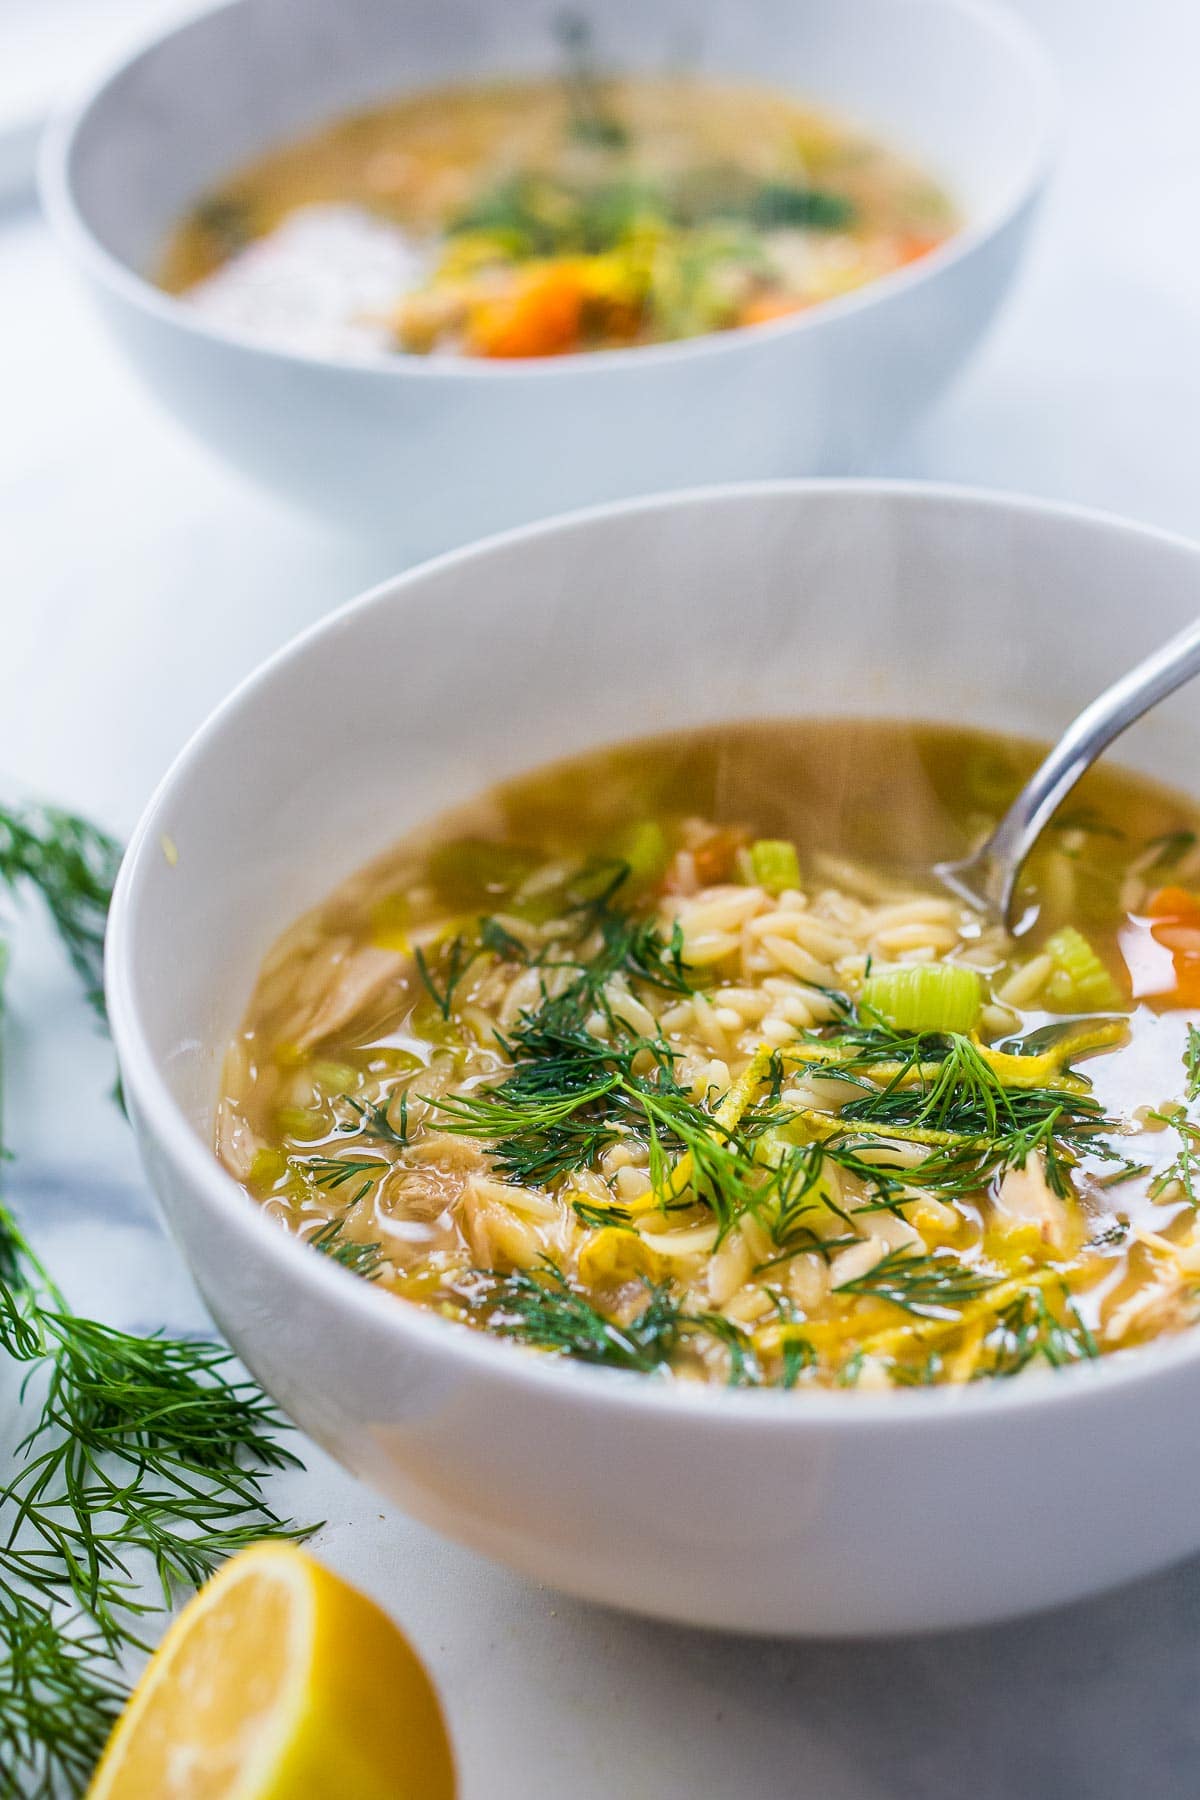 This Chicken Orzo Soup is enhanced with lemon, coriander and dill. Bright and springy, this soup is tangy, light and delicious! 